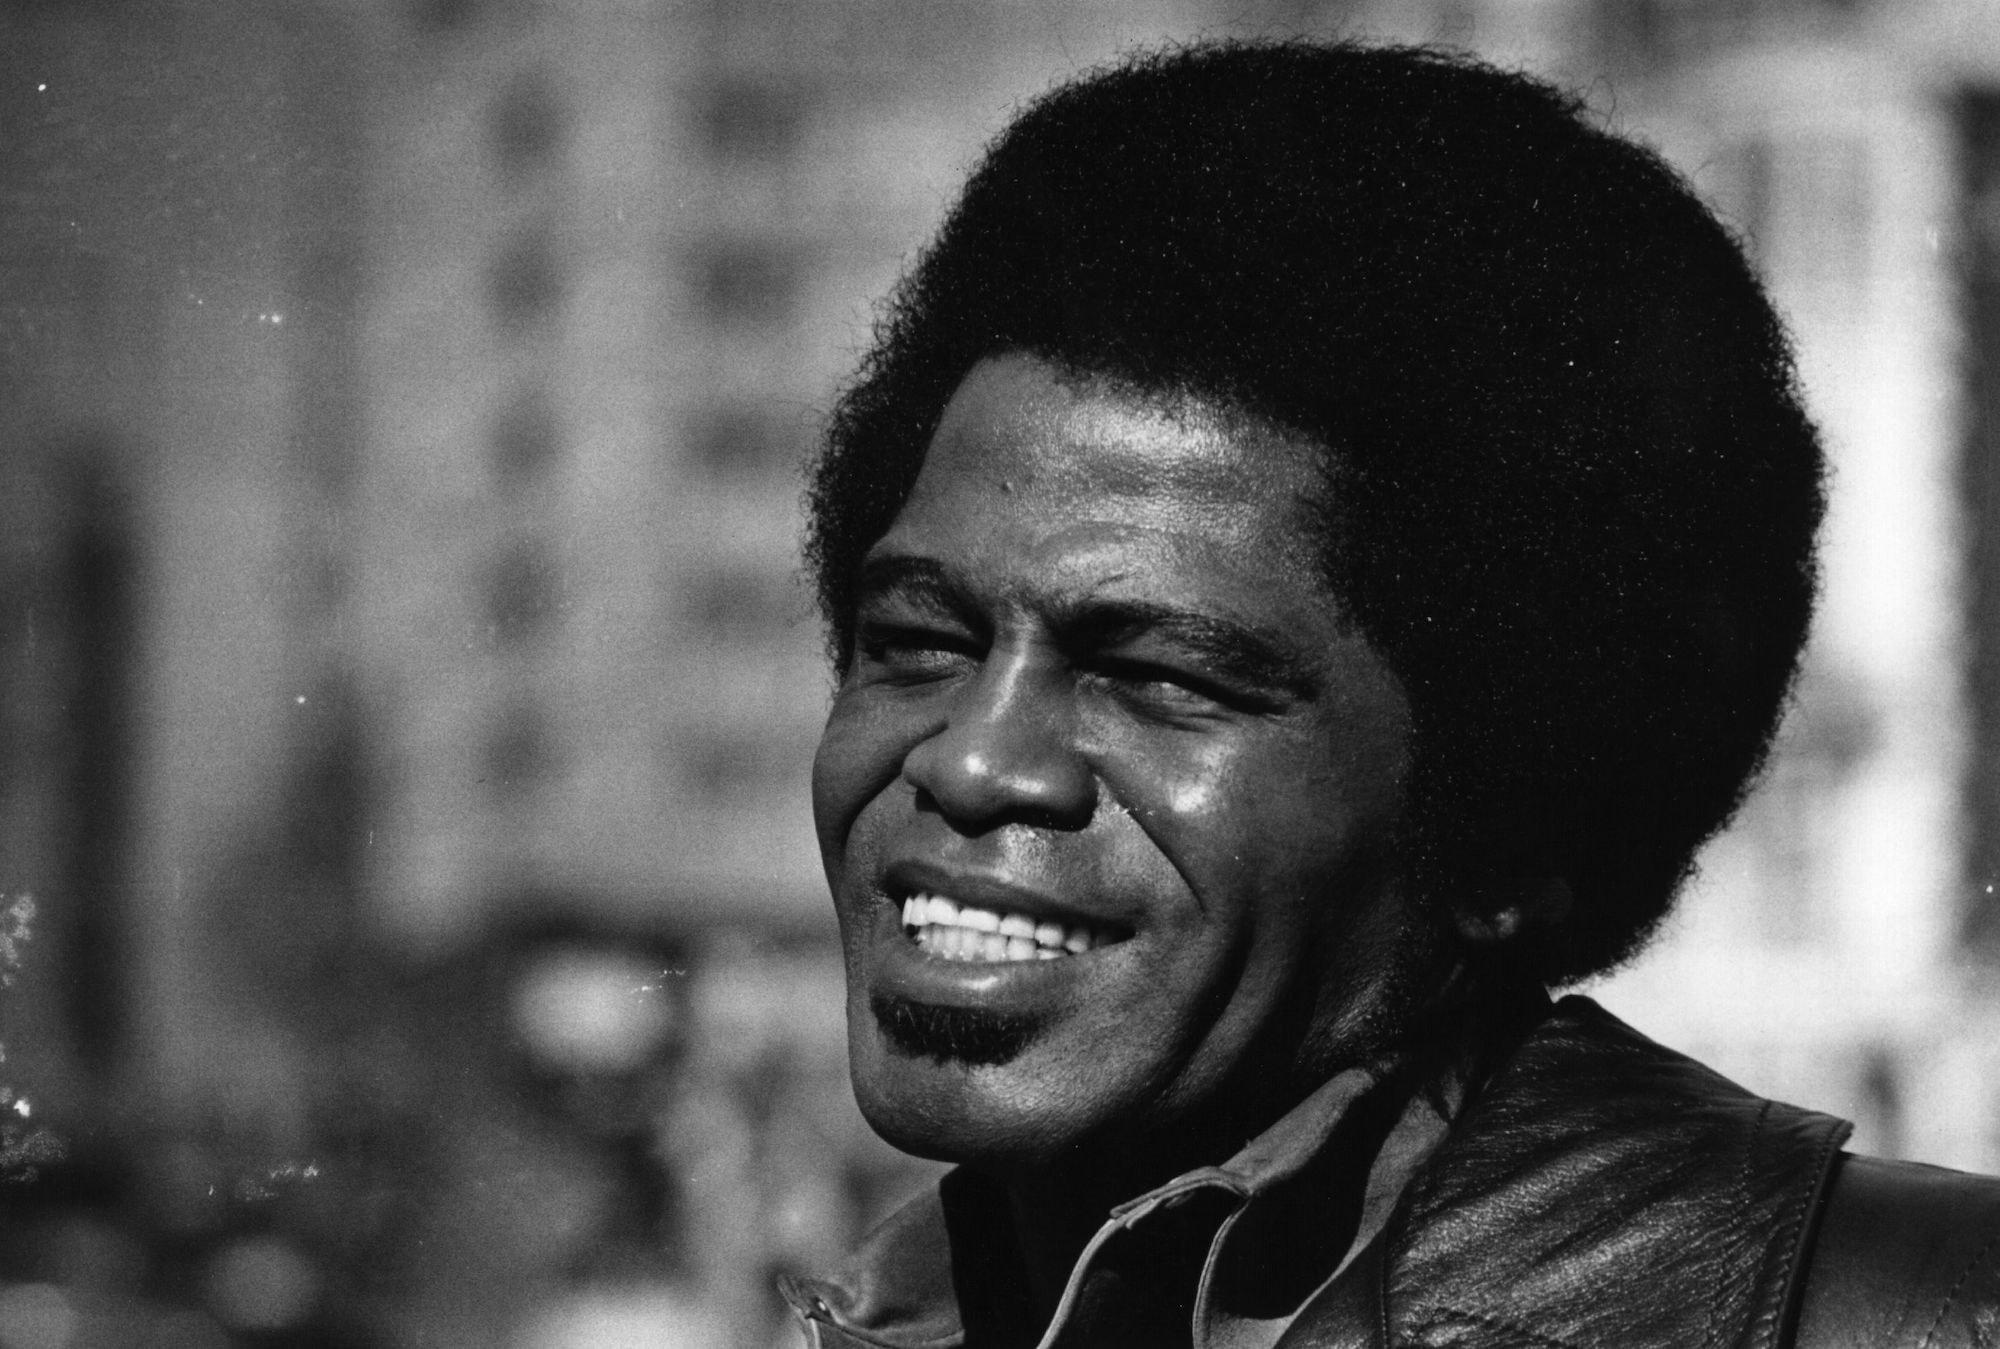 James Brown smiling in a black and white photo